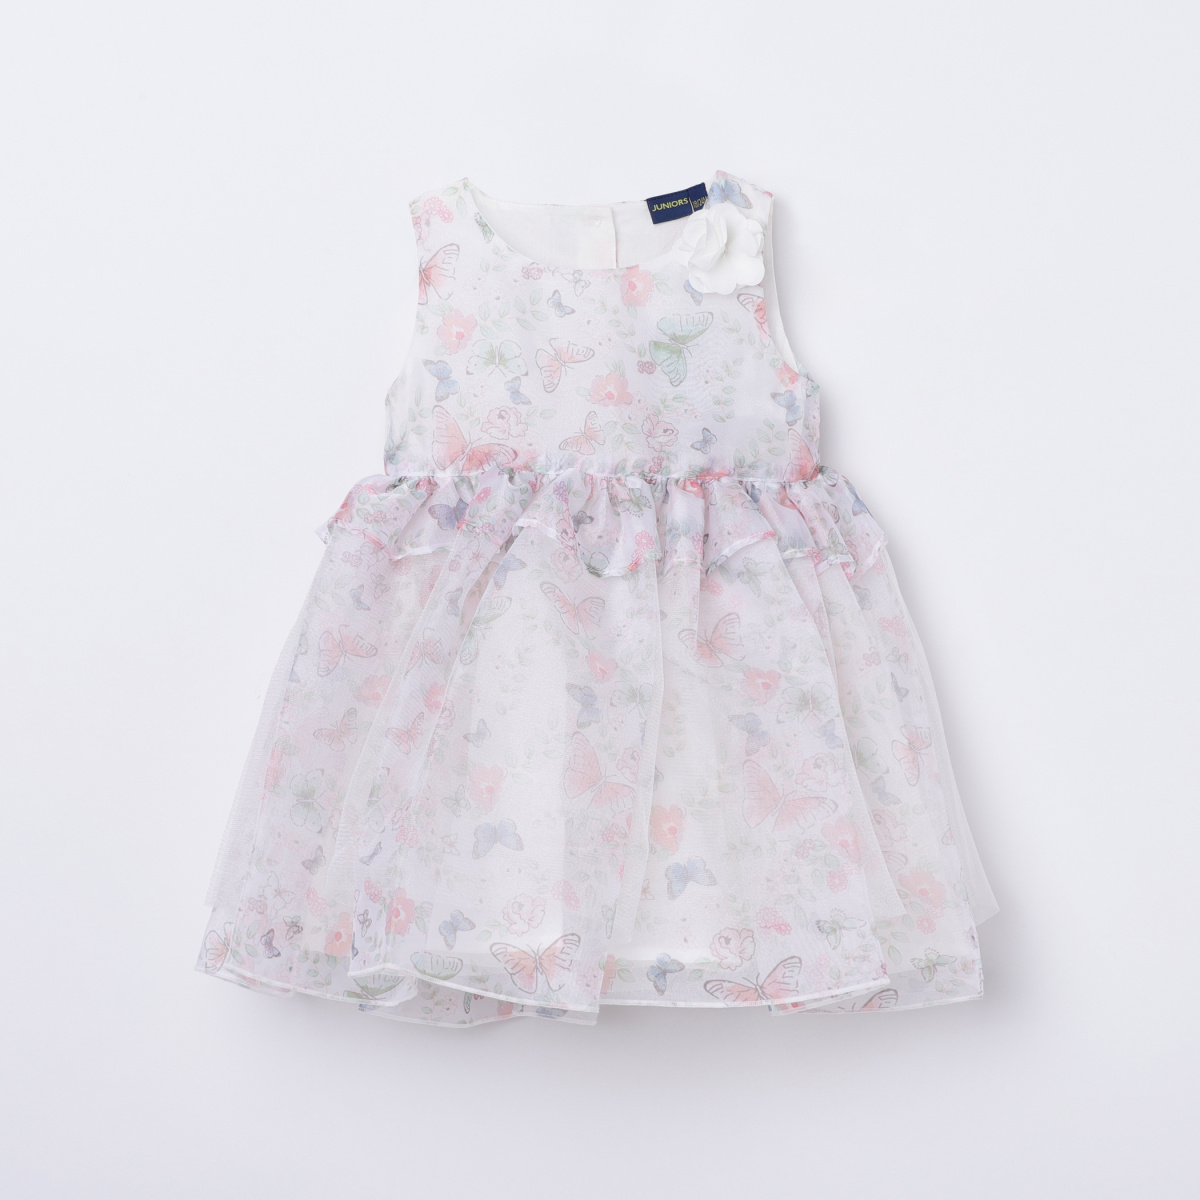 JUNIORS Girls Floral Print Fit and Flare Dress